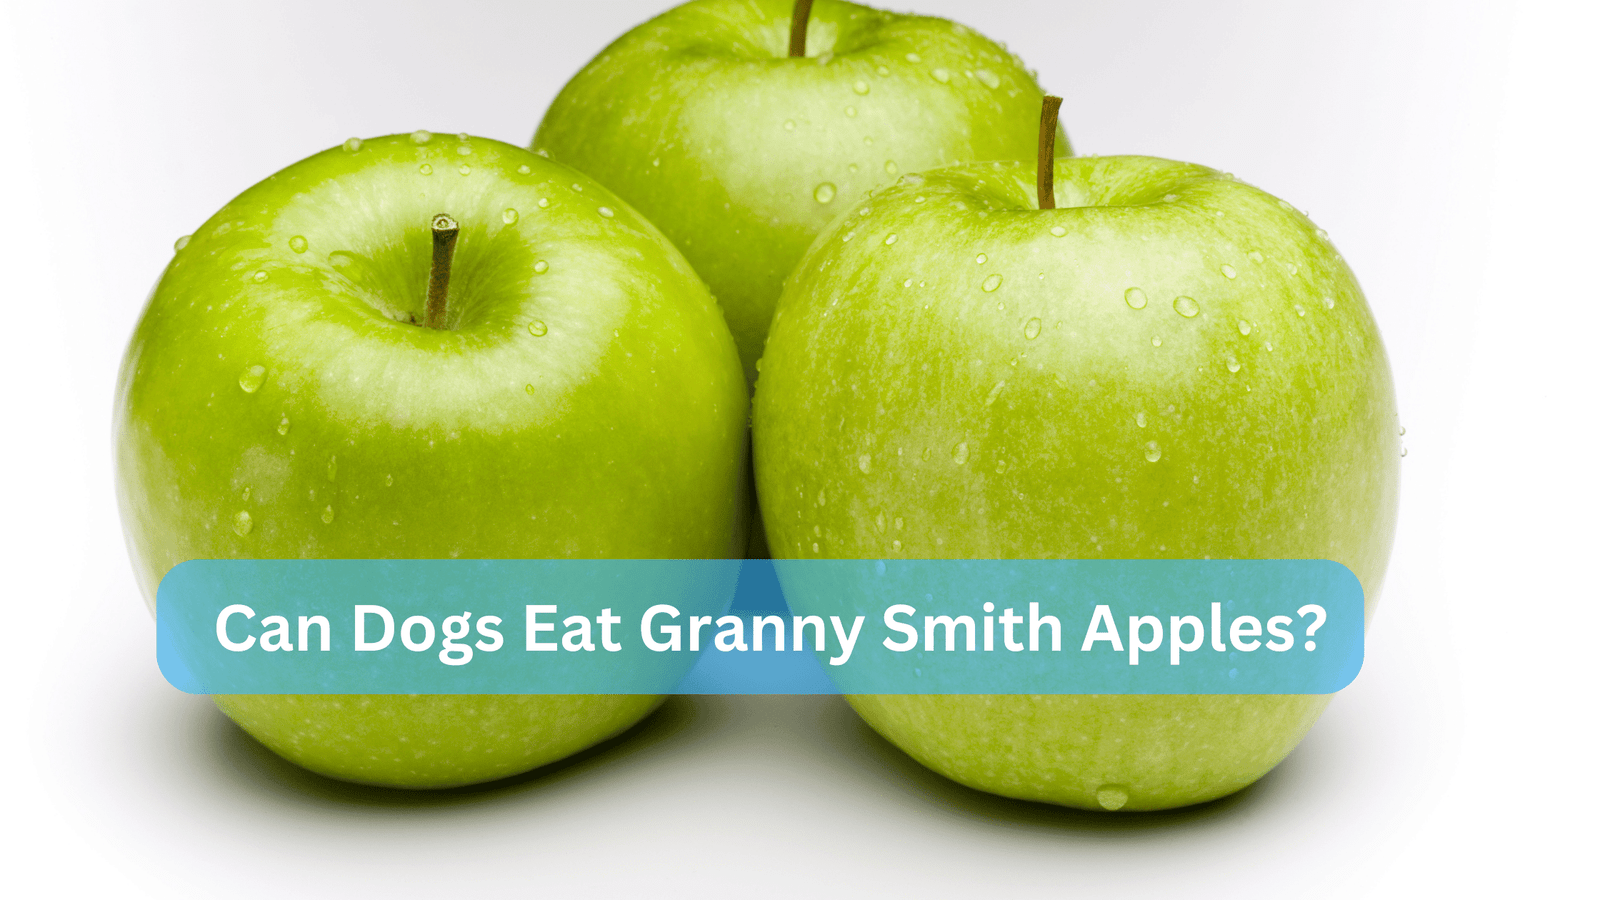 Can Dogs Eat Granny Smith Apples